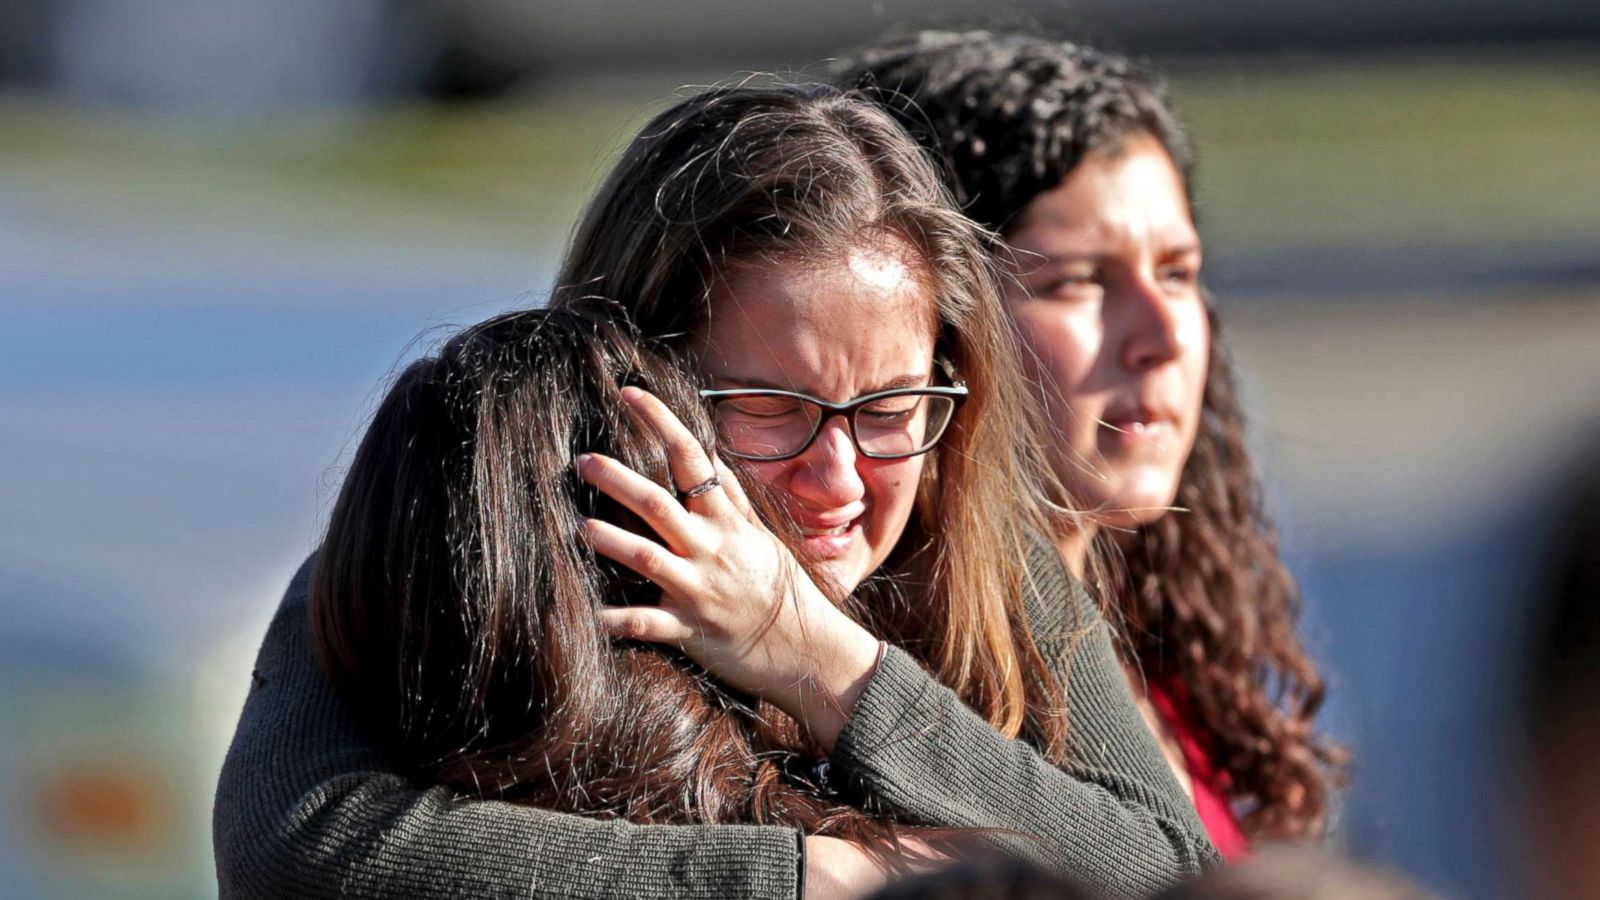 PHOTO: Students released from a lockdown embrace following a shooting at Marjory Stoneman Douglas High School in Parkland, Fla., Feb. 14, 2018.